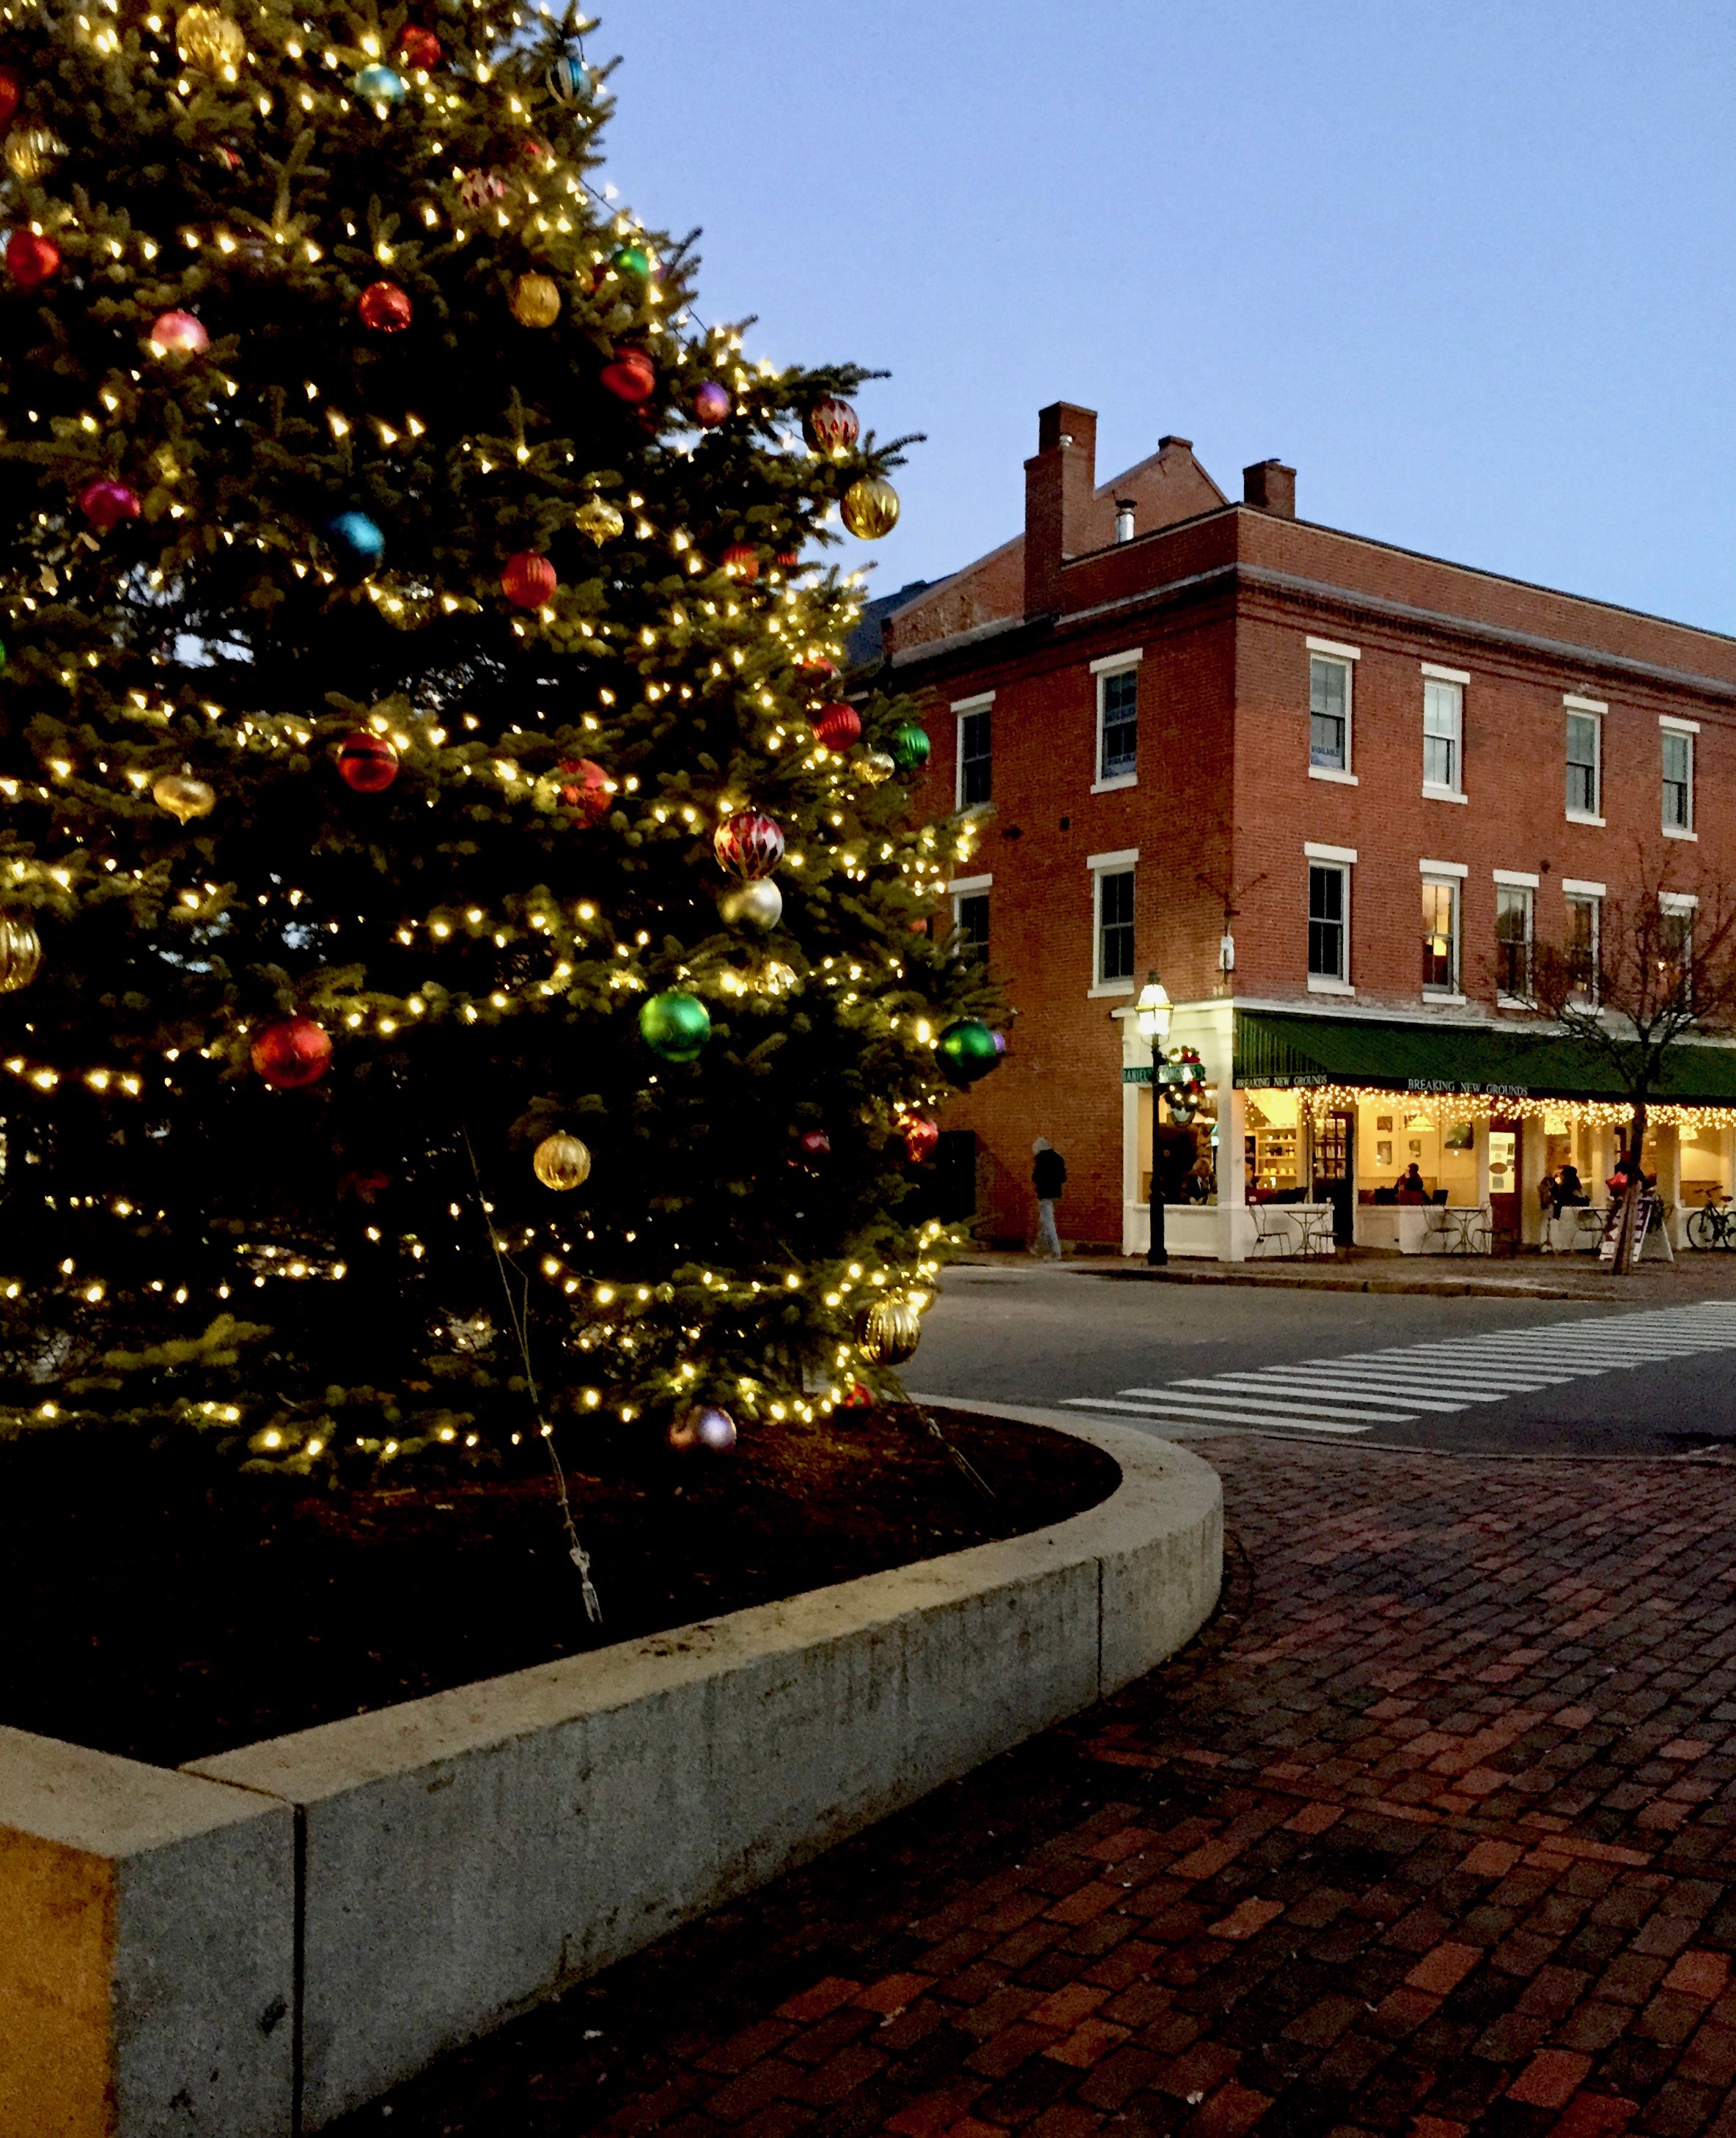 Christmas in Portsmouth New Hampshire - LINDA SMITH DAVIS pic